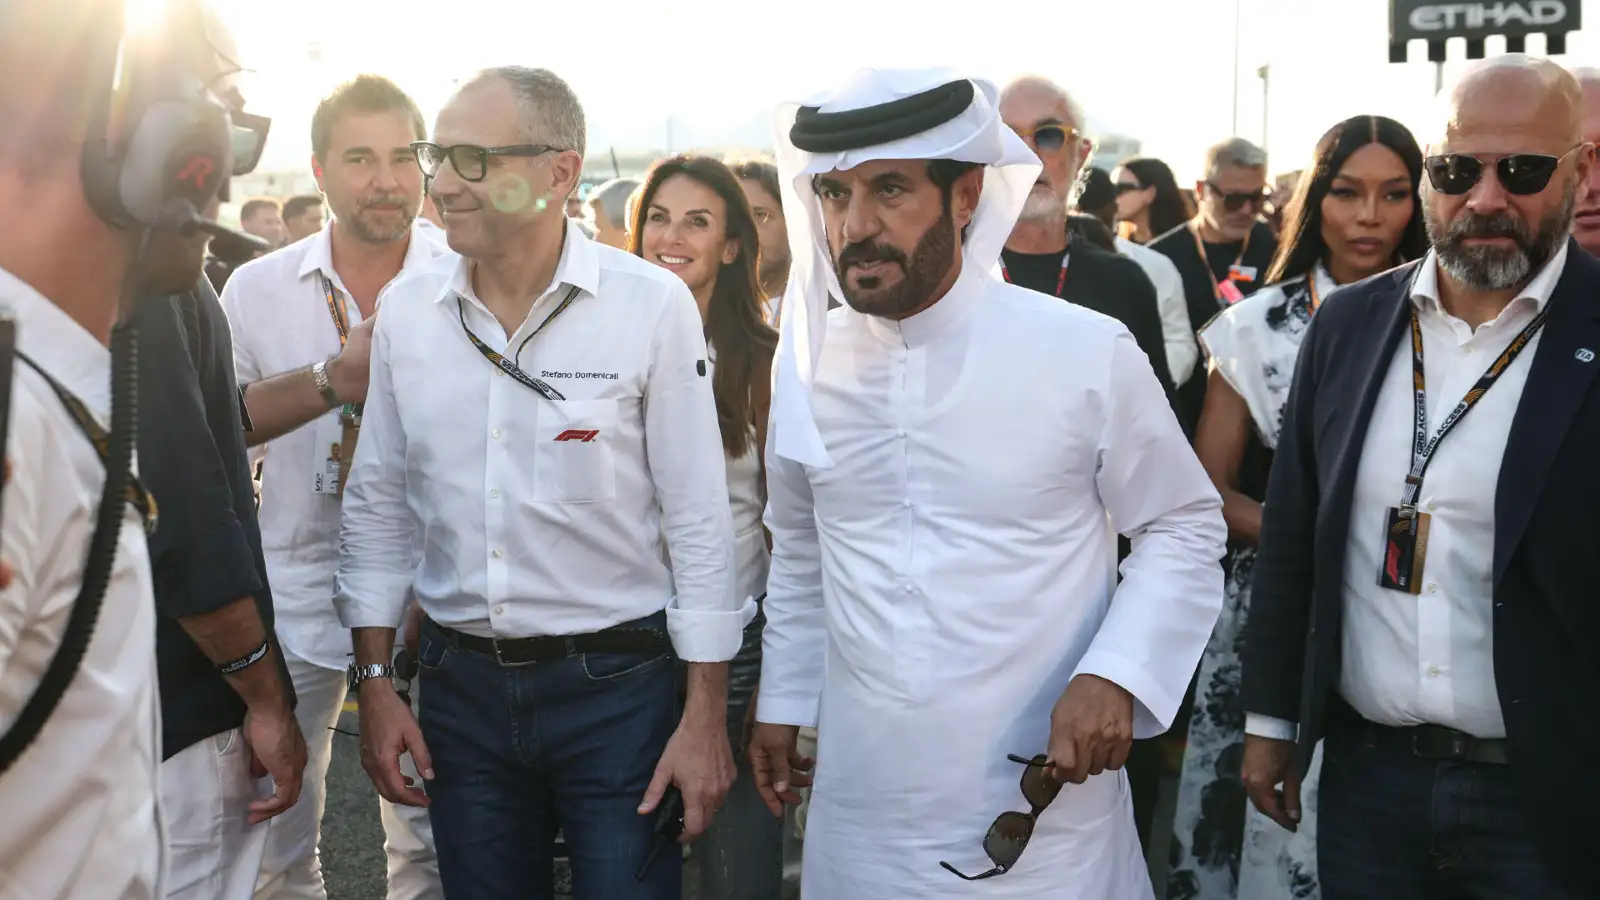 Mohammed Ben Sulayem walks on the grid at the Abu Dhabi Grand Prix.